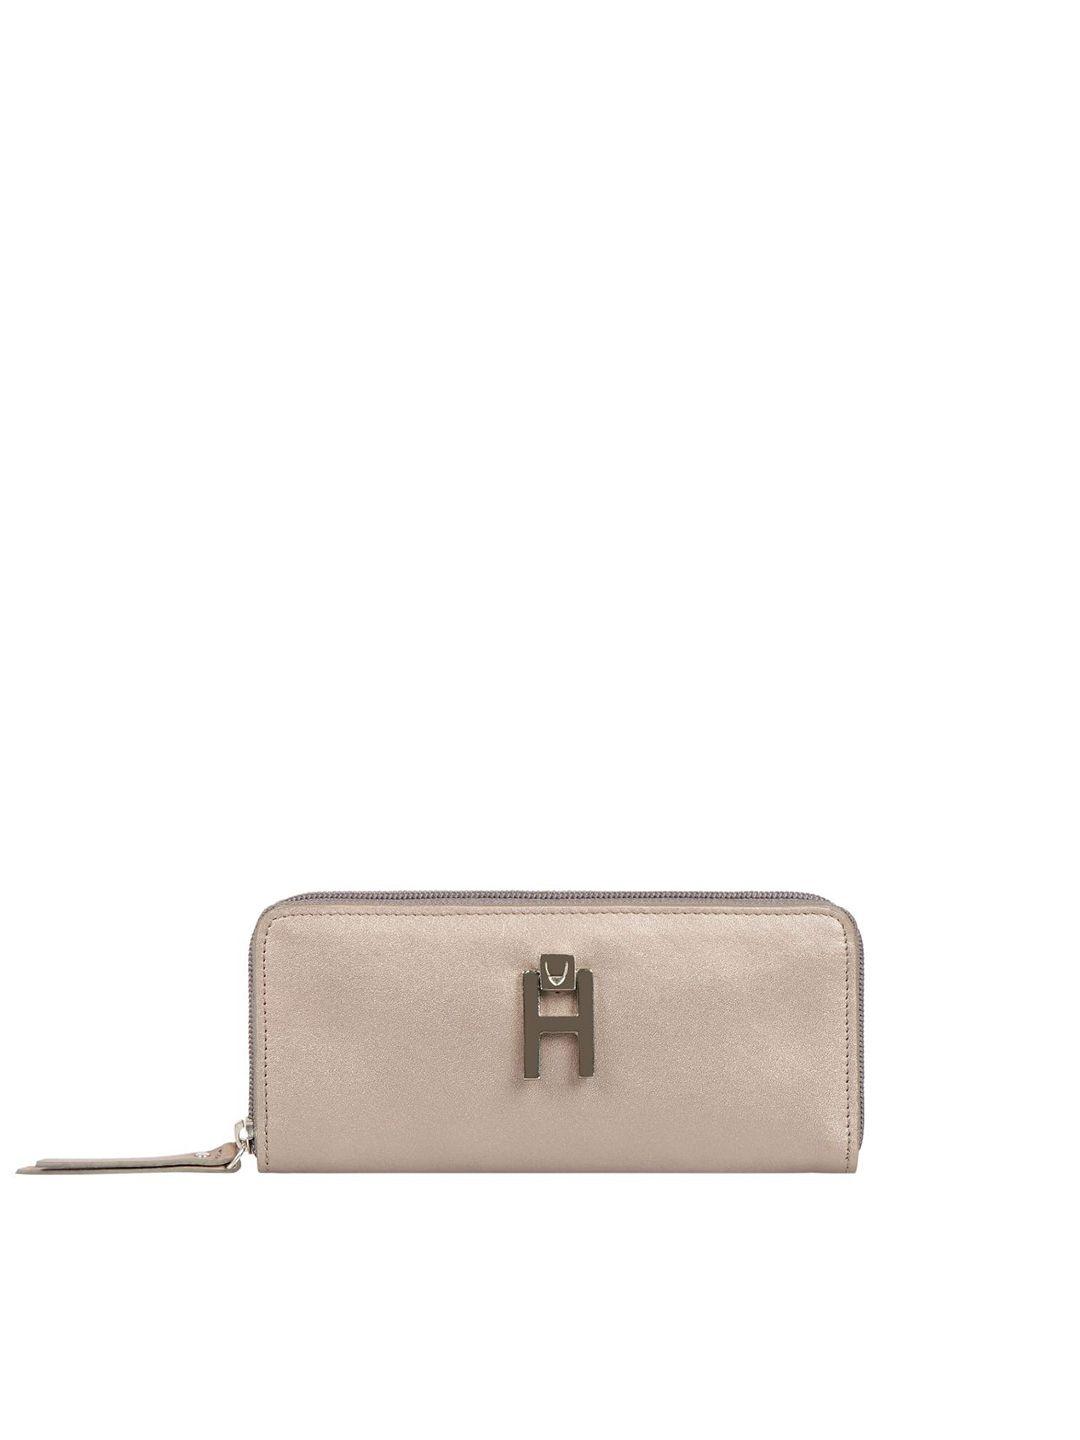 hidesign taupe solid purse clutch